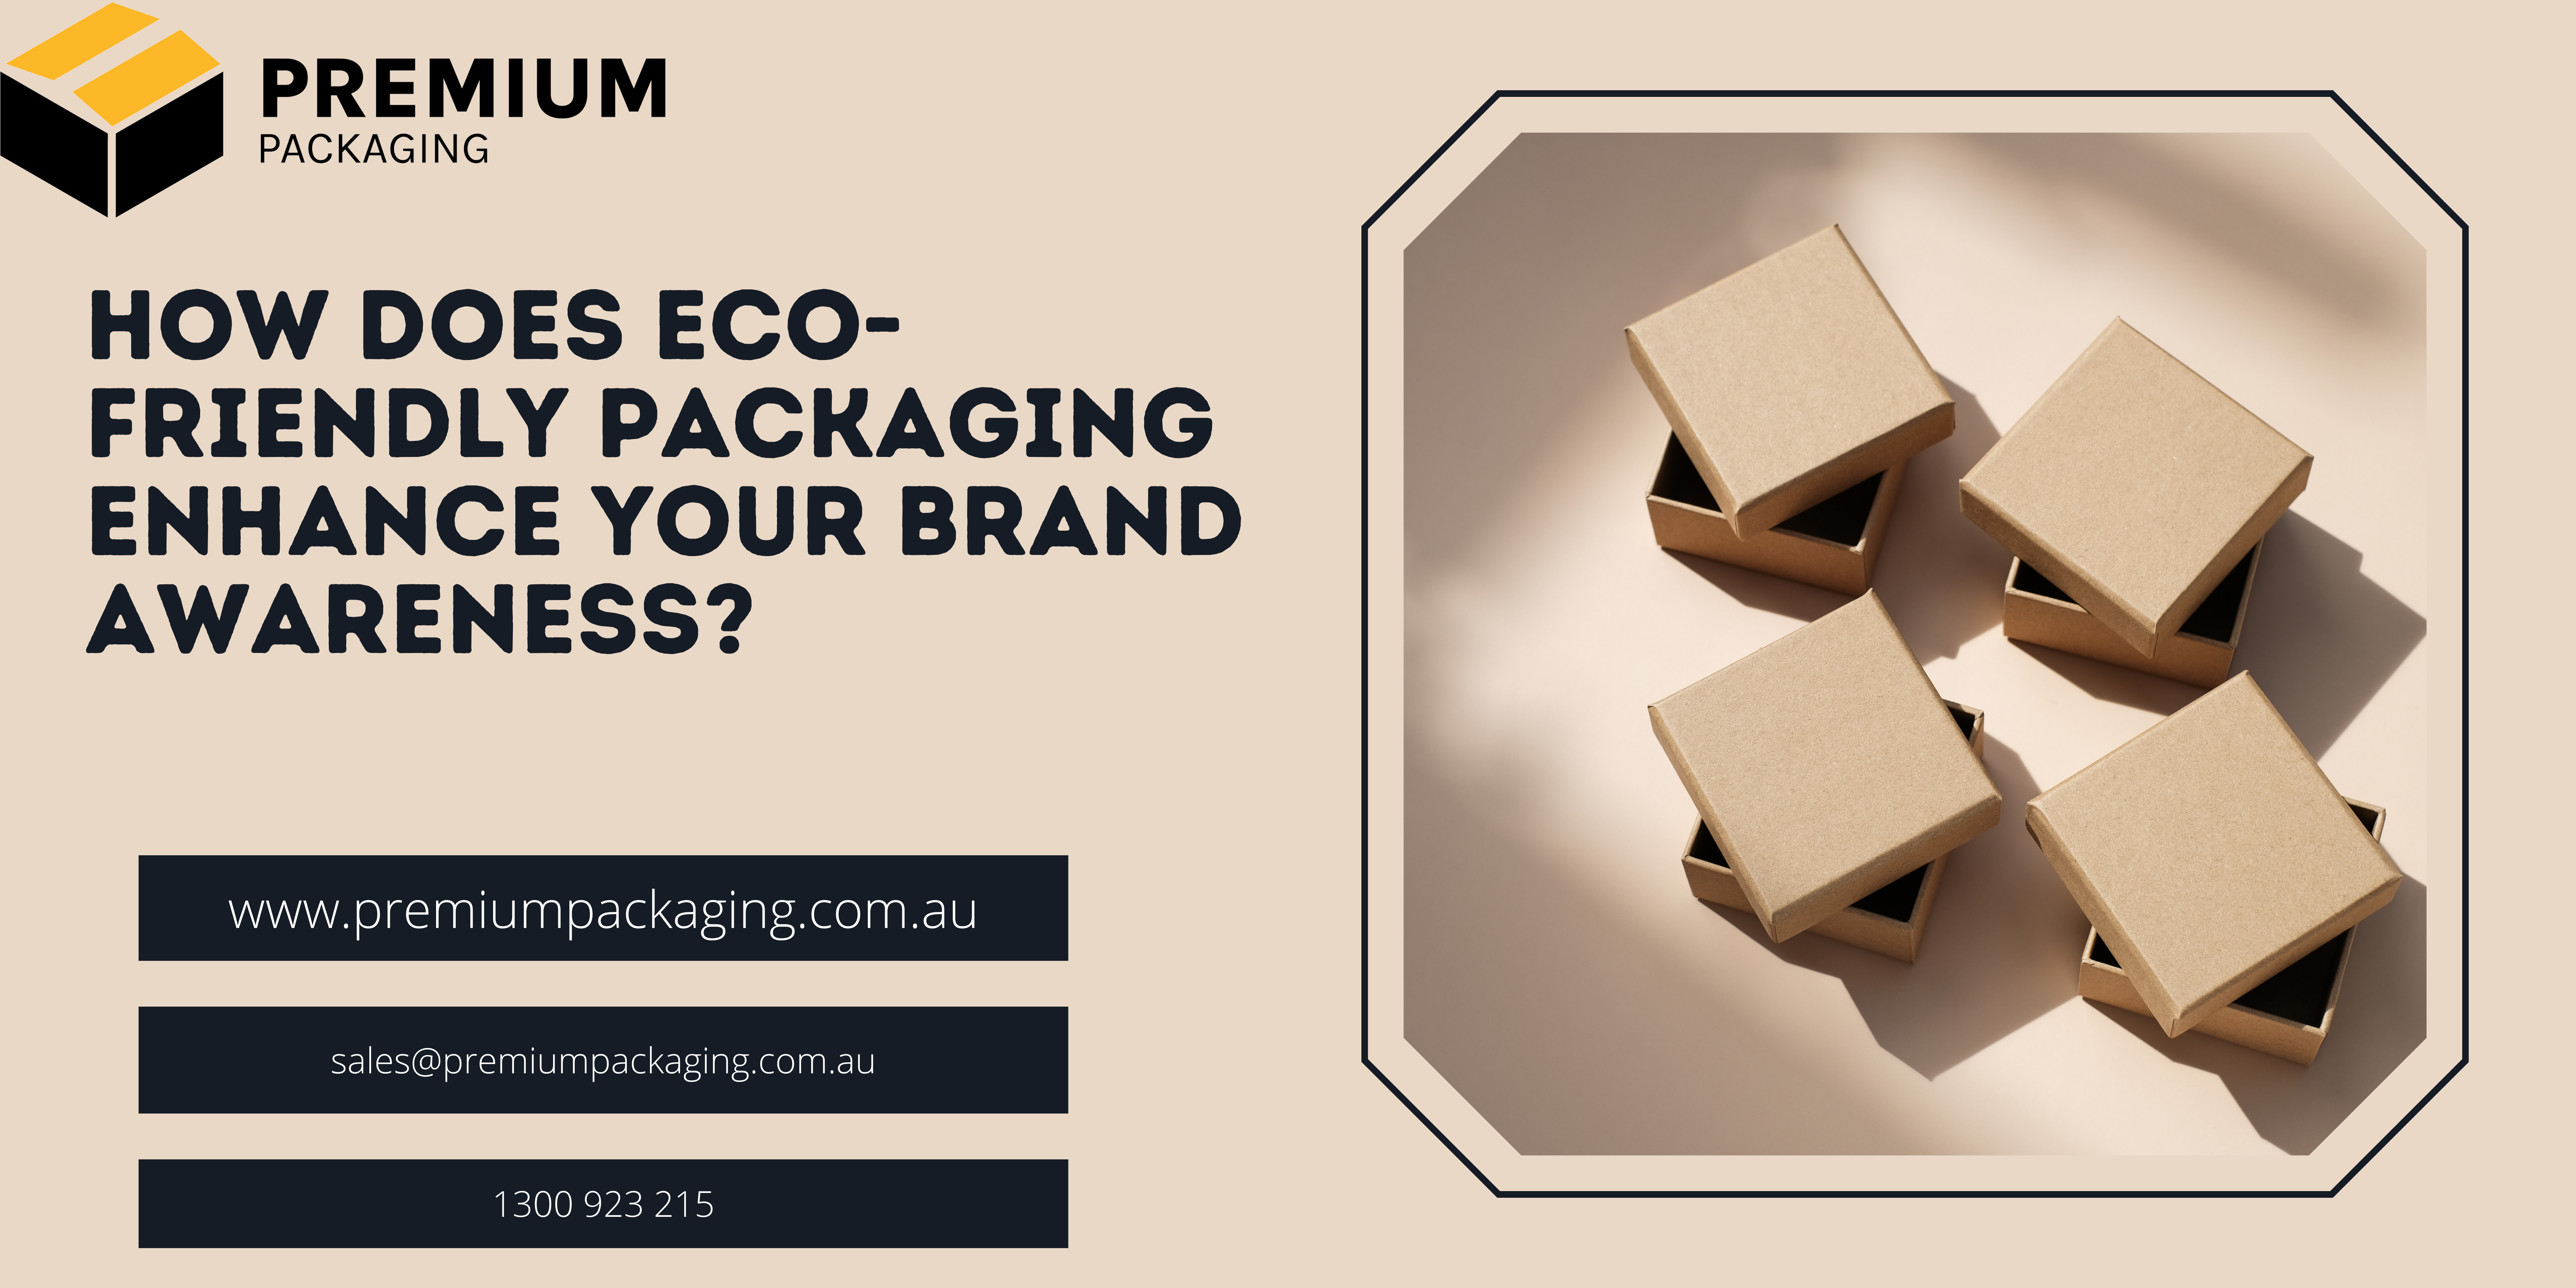 How Does Eco-Friendly Packaging Enhance Your Brand Awareness?